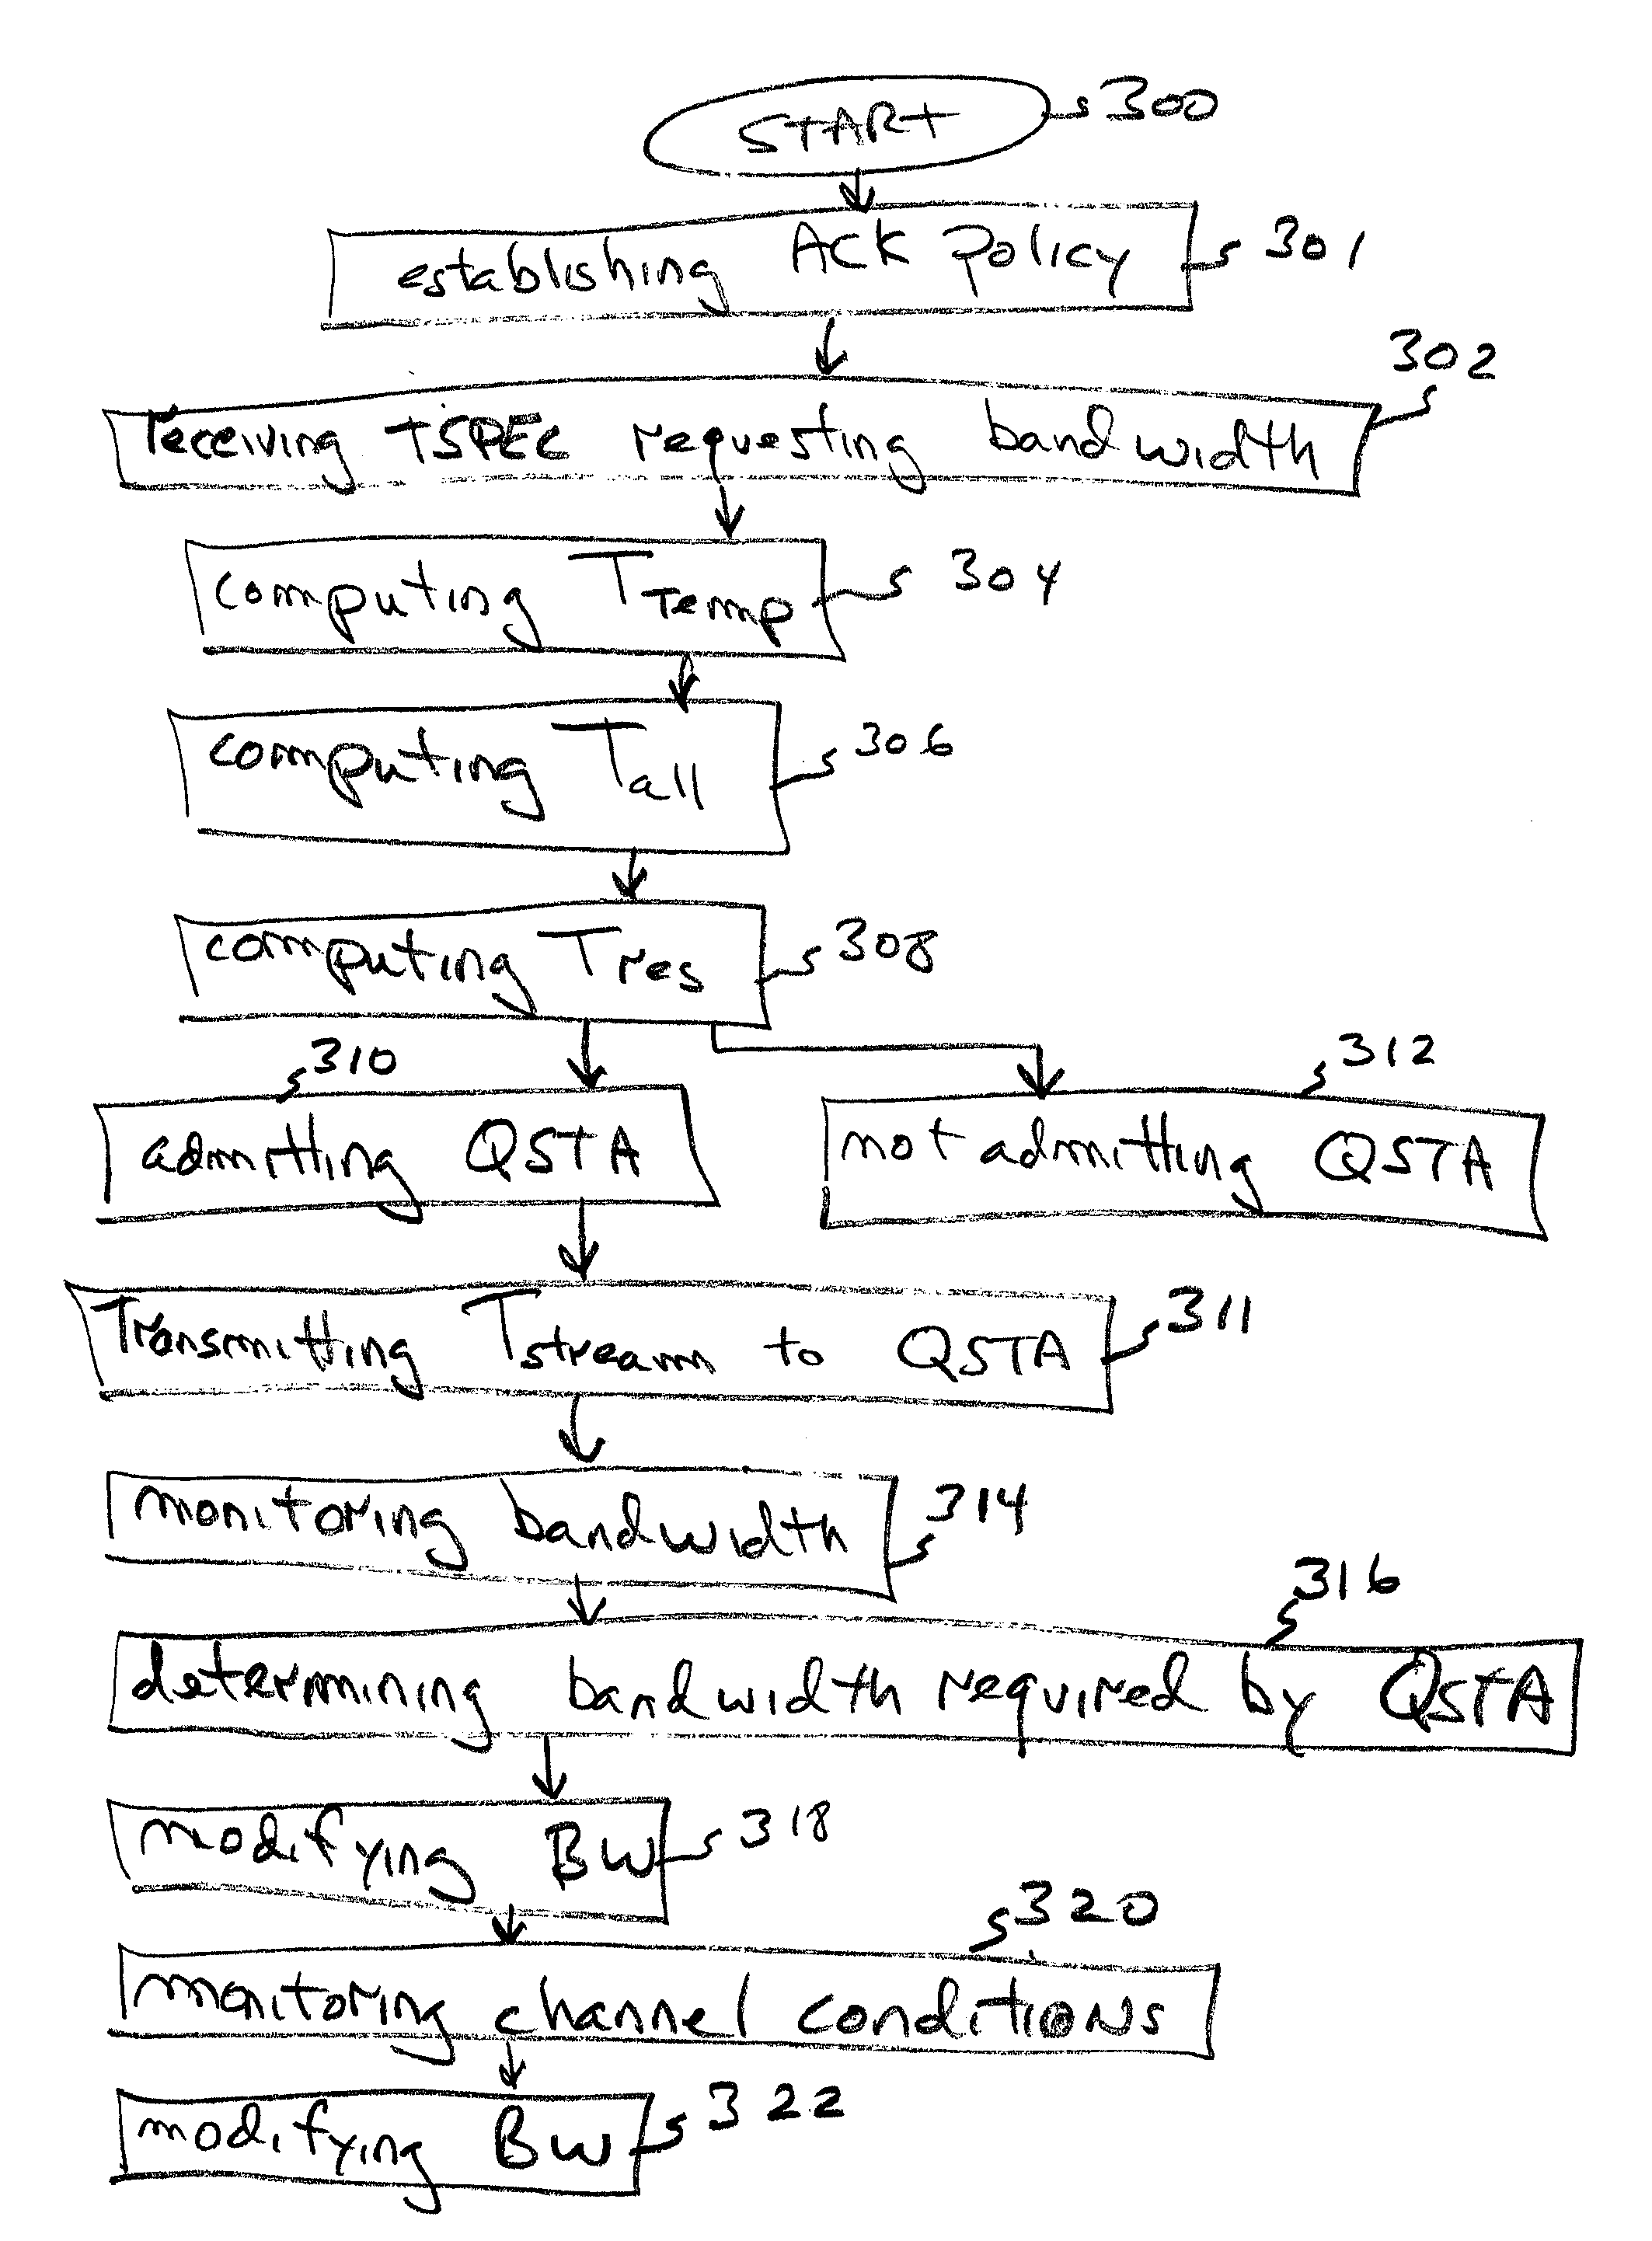 System and method for IEEE 802.11 network admission control